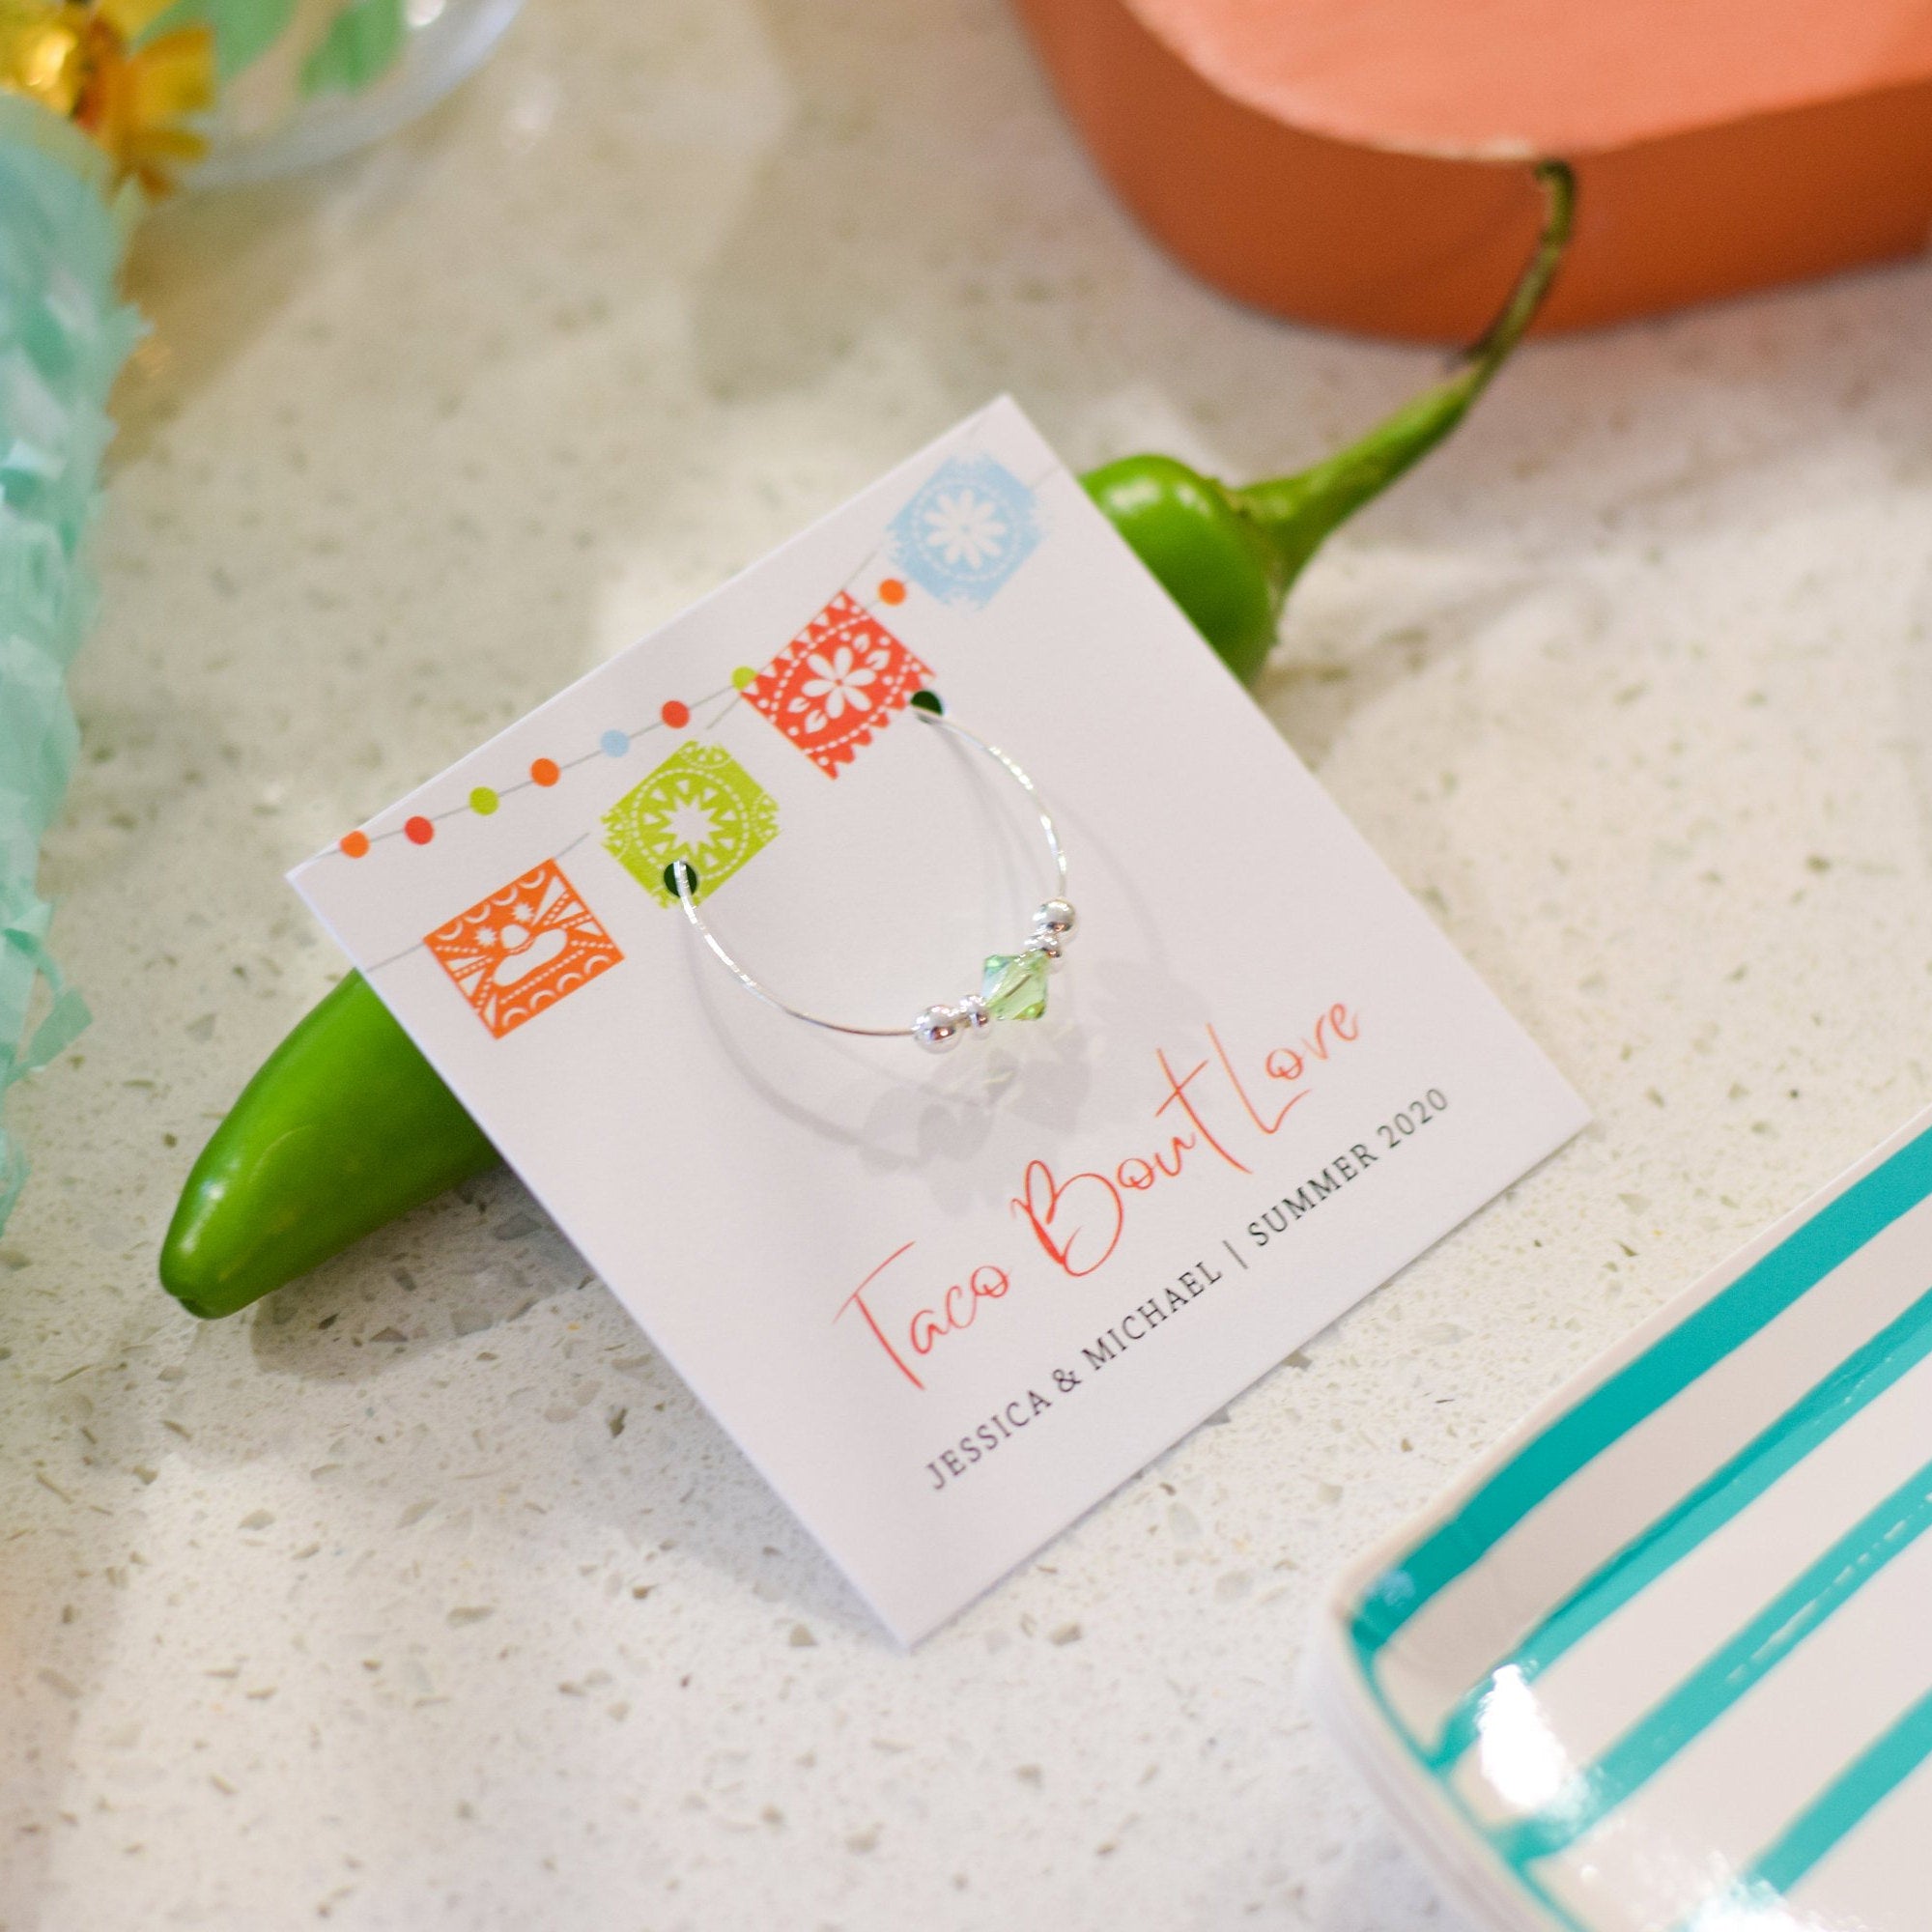 Fiesta Engagement Party Favors, Cinco De Mayo Engagement Party, Mexican Engagement Party Decorations, Taco Engagement Party, Wine Charms - @PlumPolkaDot 